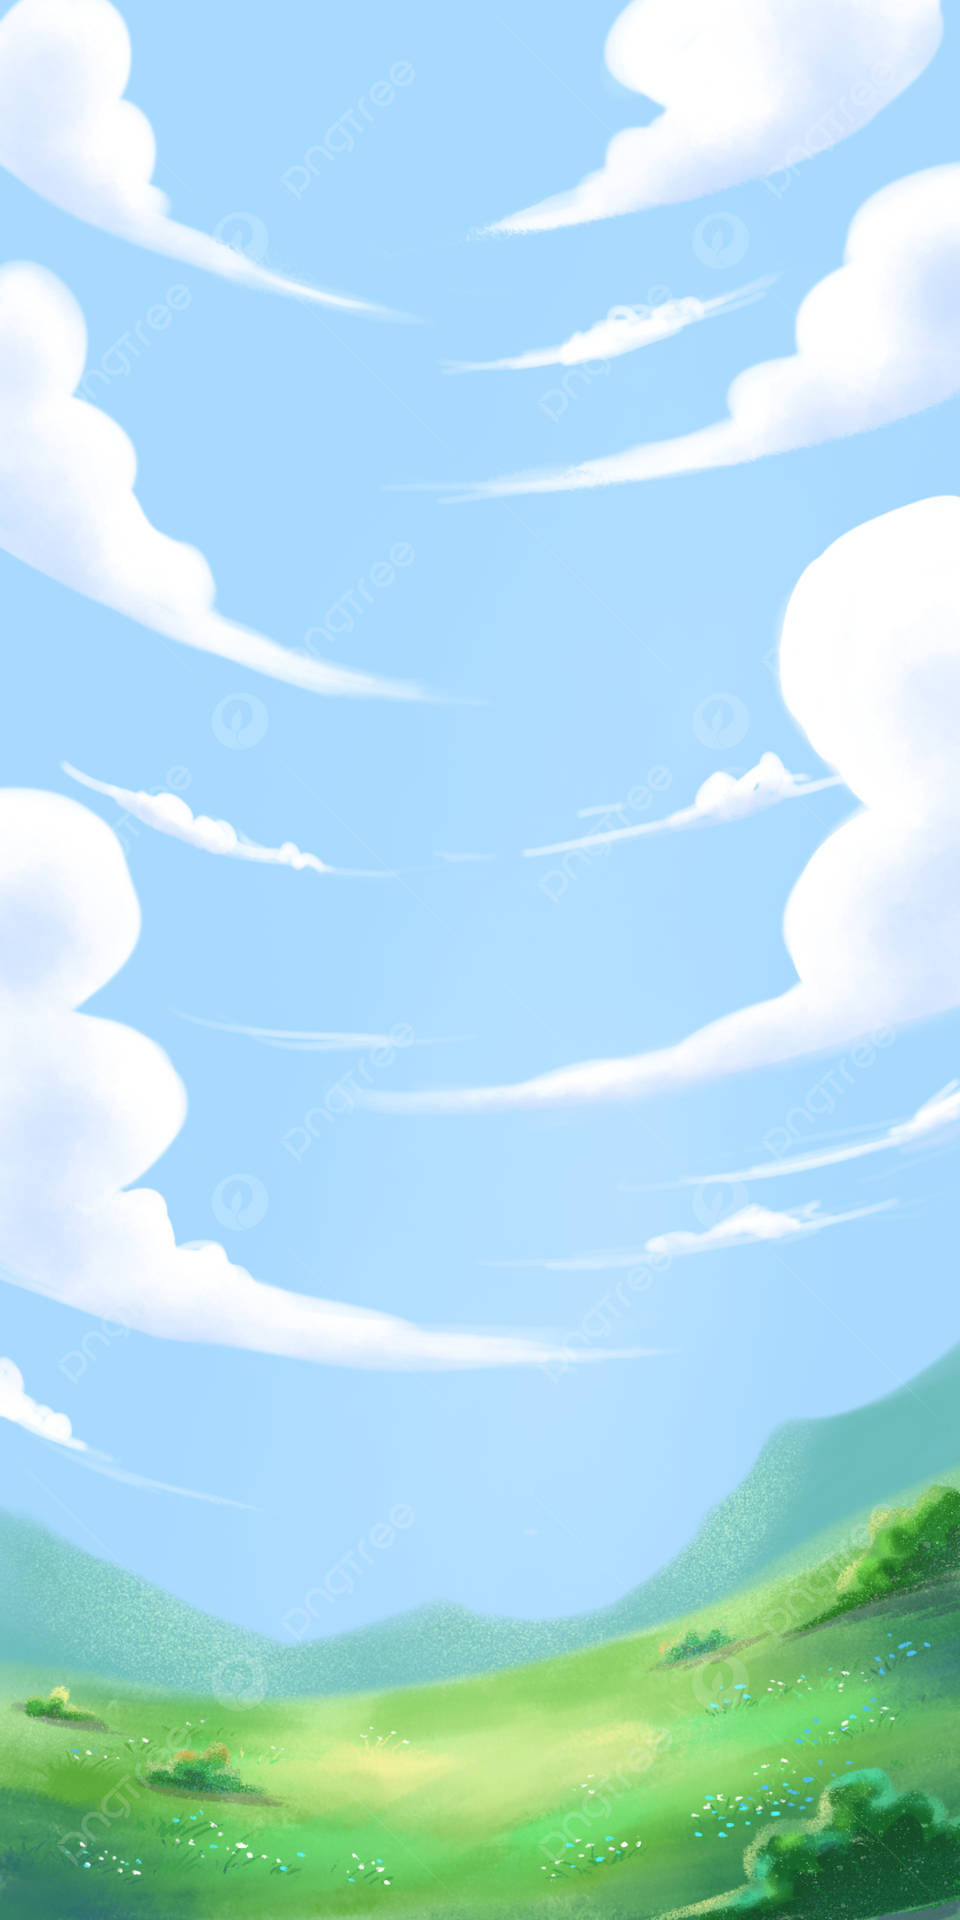 A Cartoon Landscape With Clouds And Grass Wallpaper